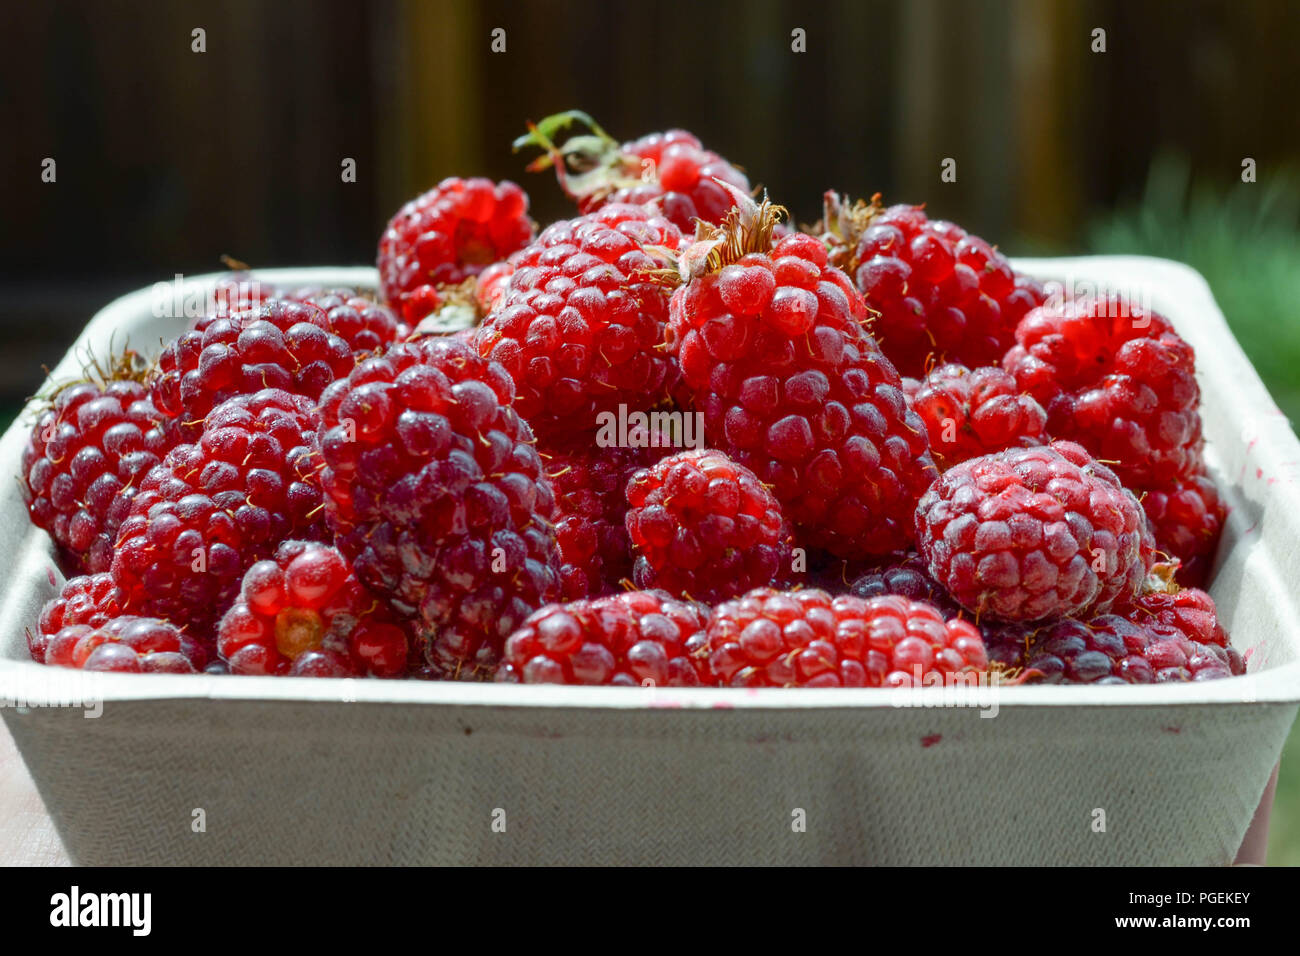 Tayberries (A blackberry-raspberry hybrid originating from Scotland) in a square paper container Stock Photo